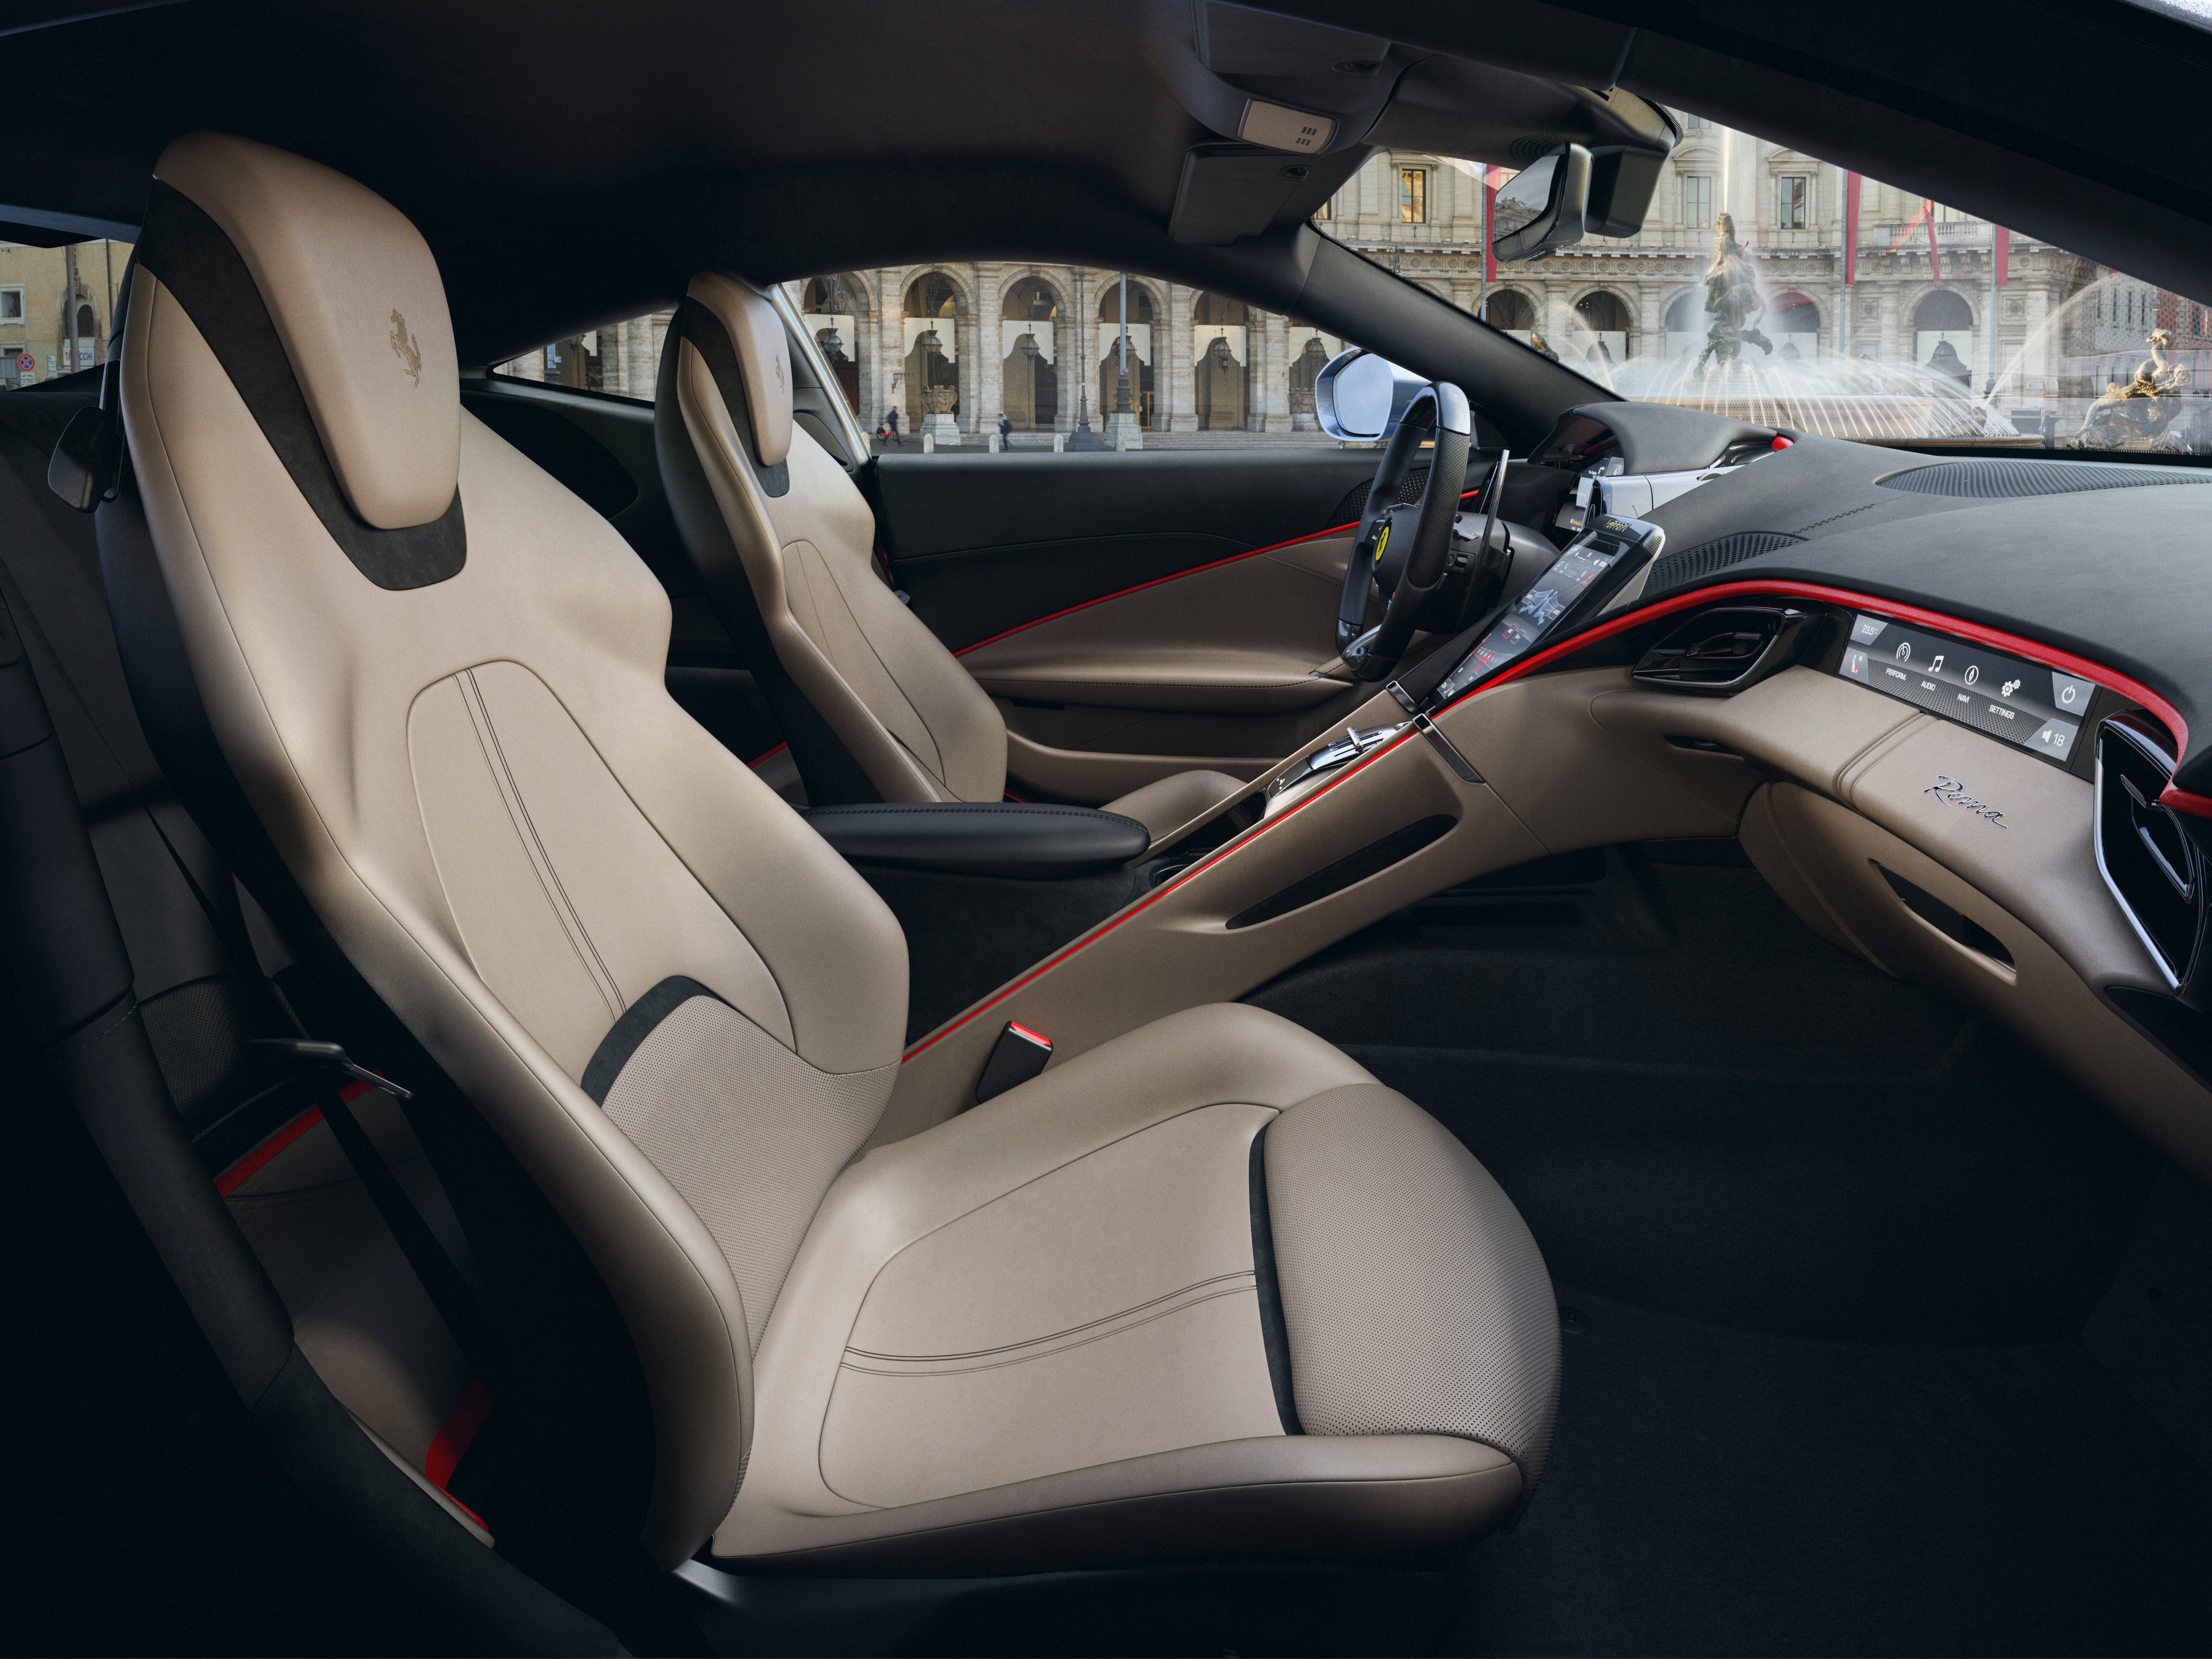 The Roma possesses all the usual accoutrements of a large luxury coupe